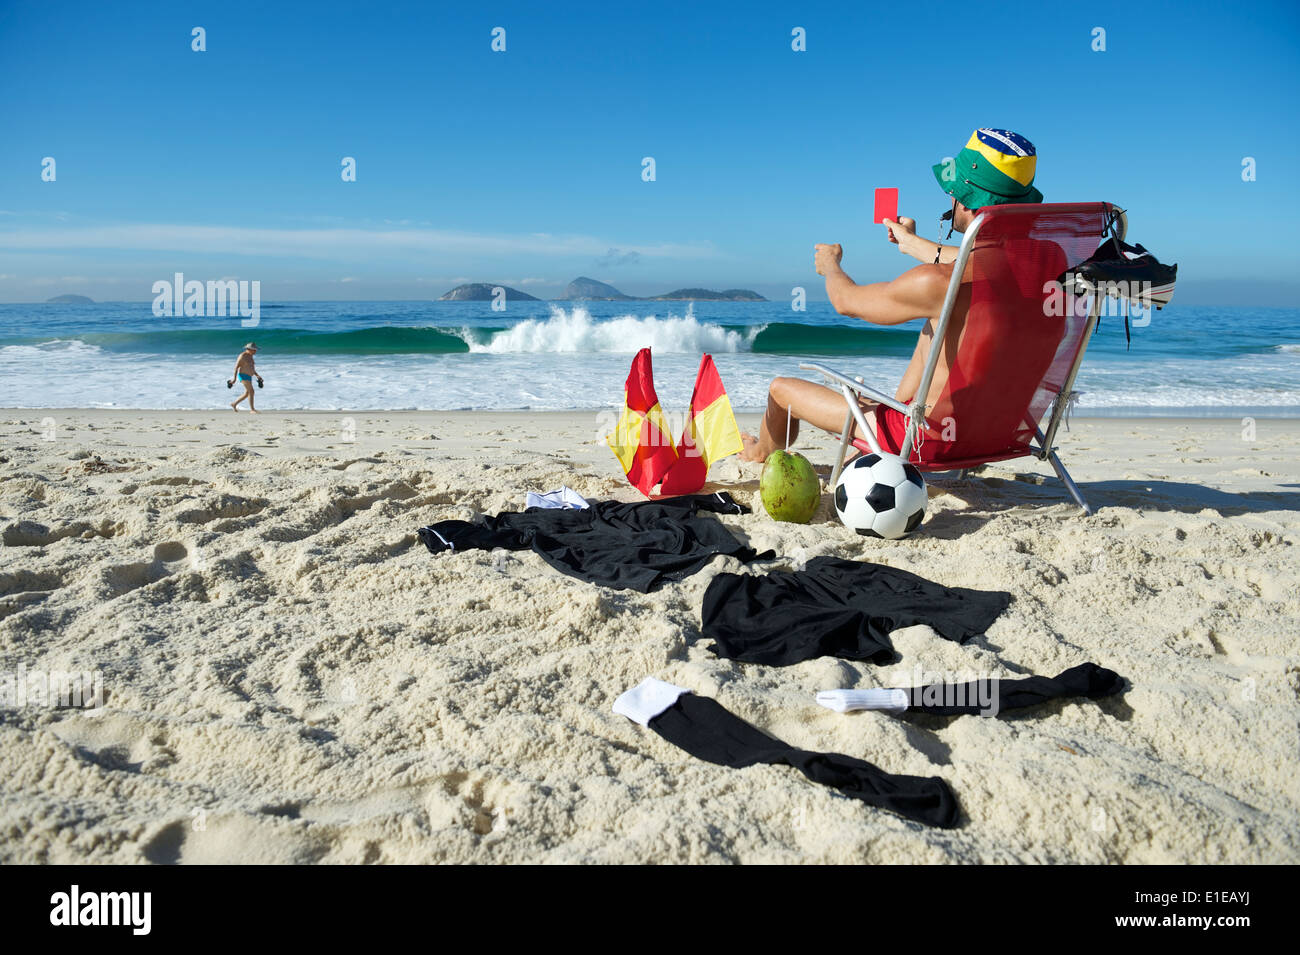 Soccer football referee holding up red card blowing whistle from a beach chair Stock Photo